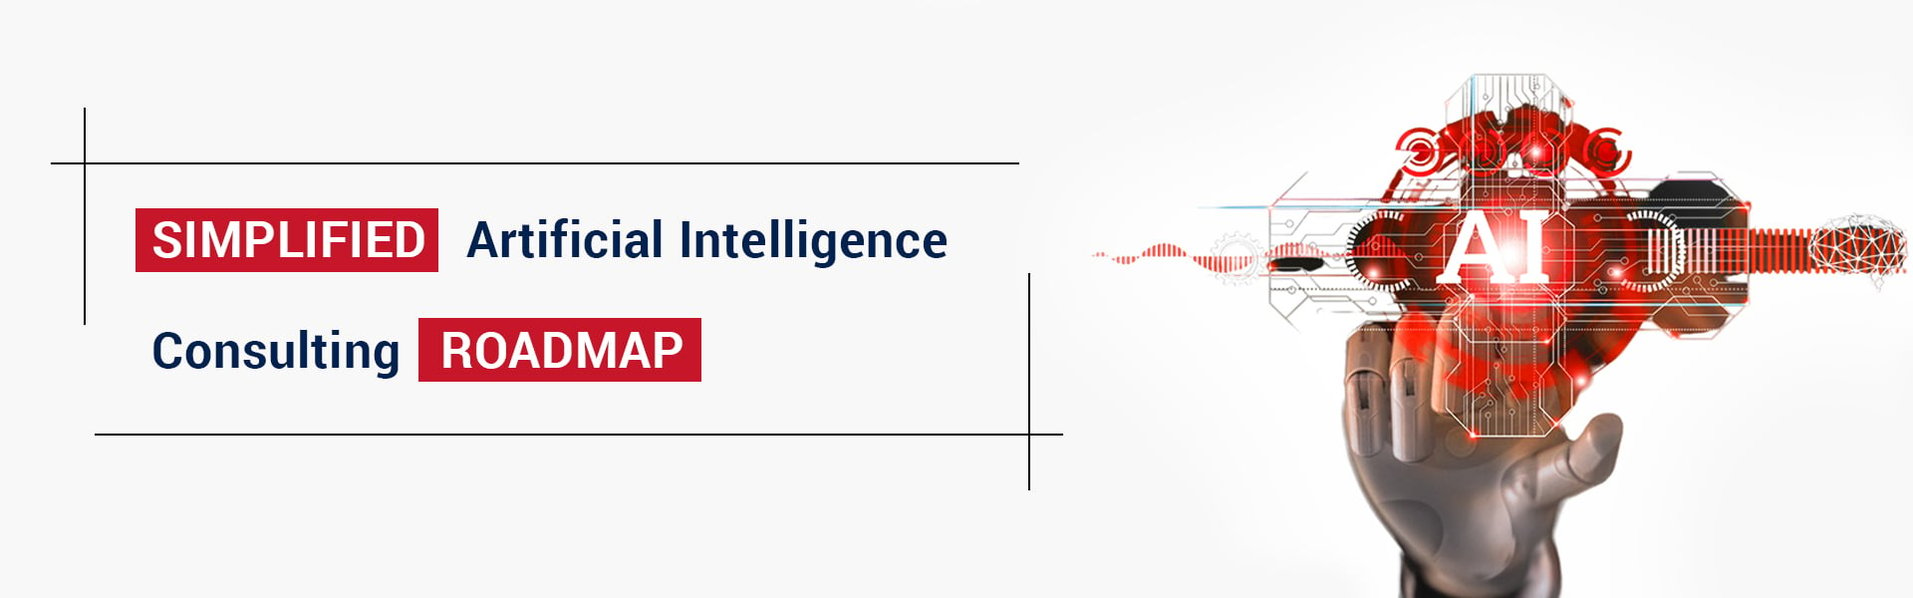 Simplified Artifical Intelligence consulting roadmap